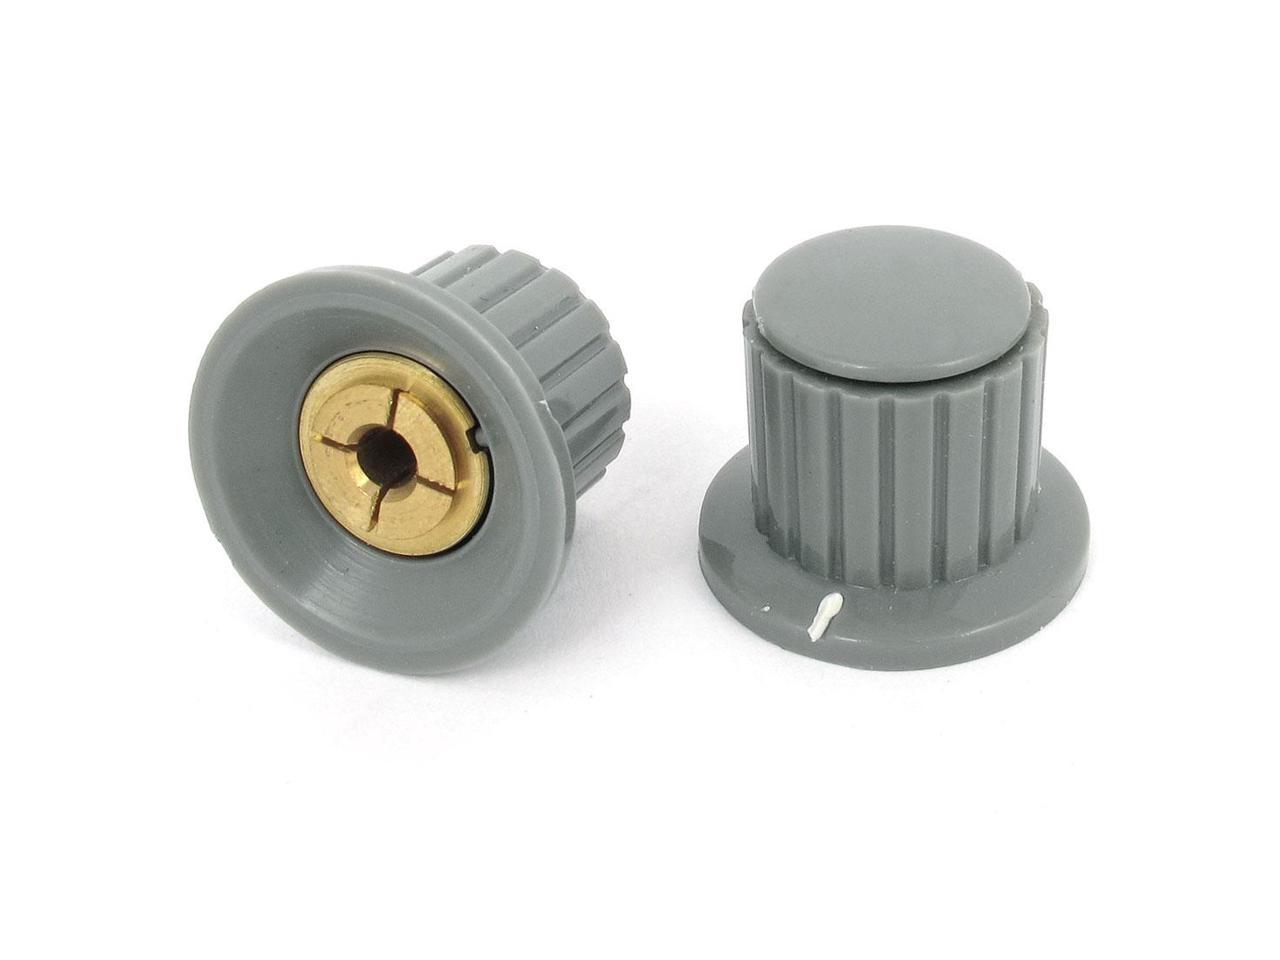 6mm Plastic Turn Knob Covers Indicator for Potentiometer Cap High 17mm Gray